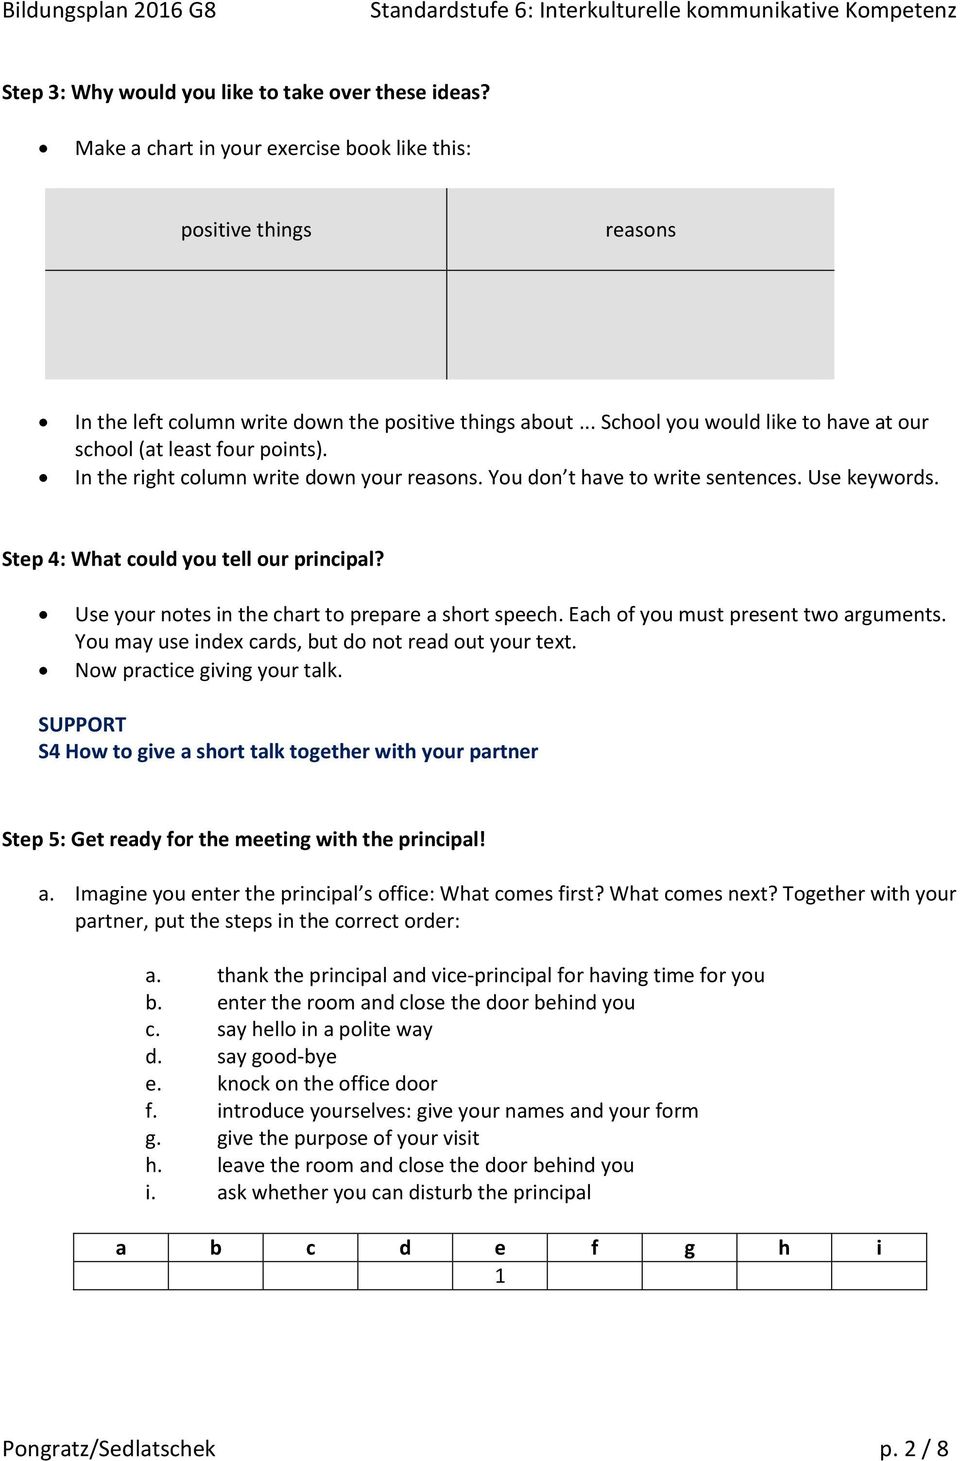 Step 4: What could you tell our principal? Use your notes in the chart to prepare a short speech. Each of you must present two arguments. You may use index cards, but do not read out your text.